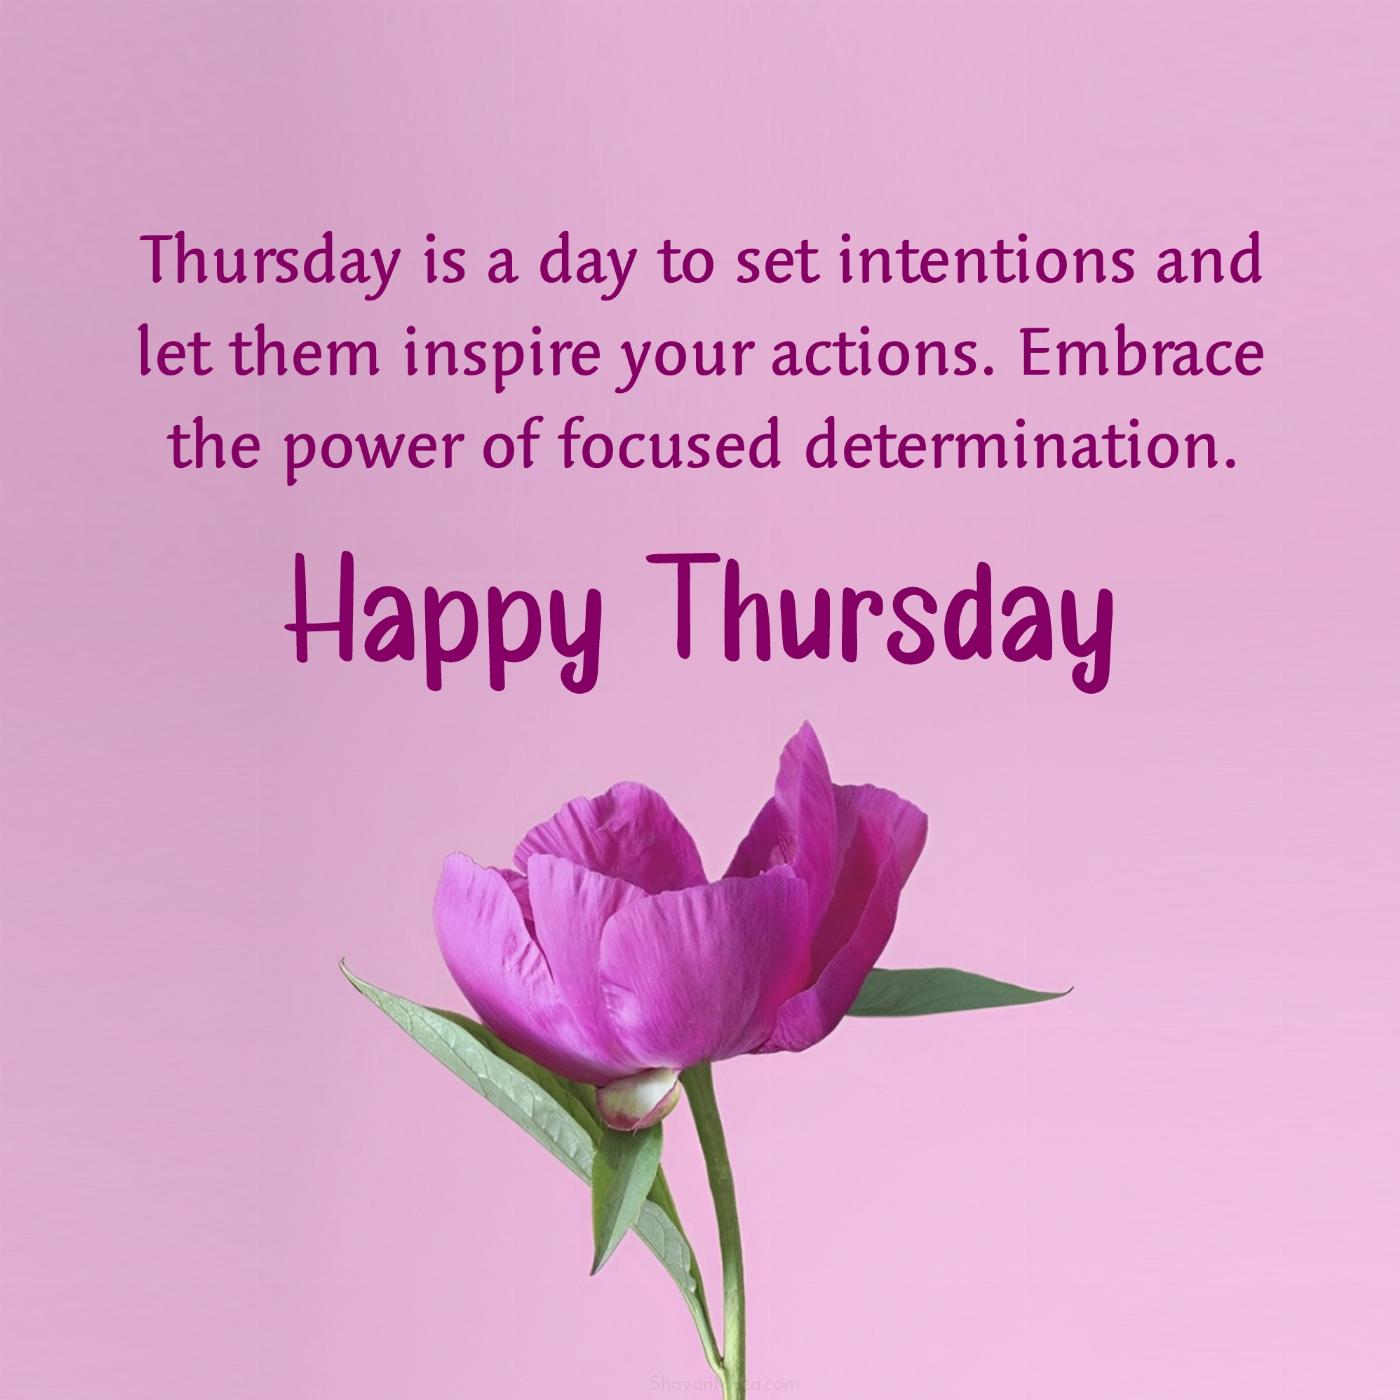 Thursday is a day to set intentions and let them inspire your actions